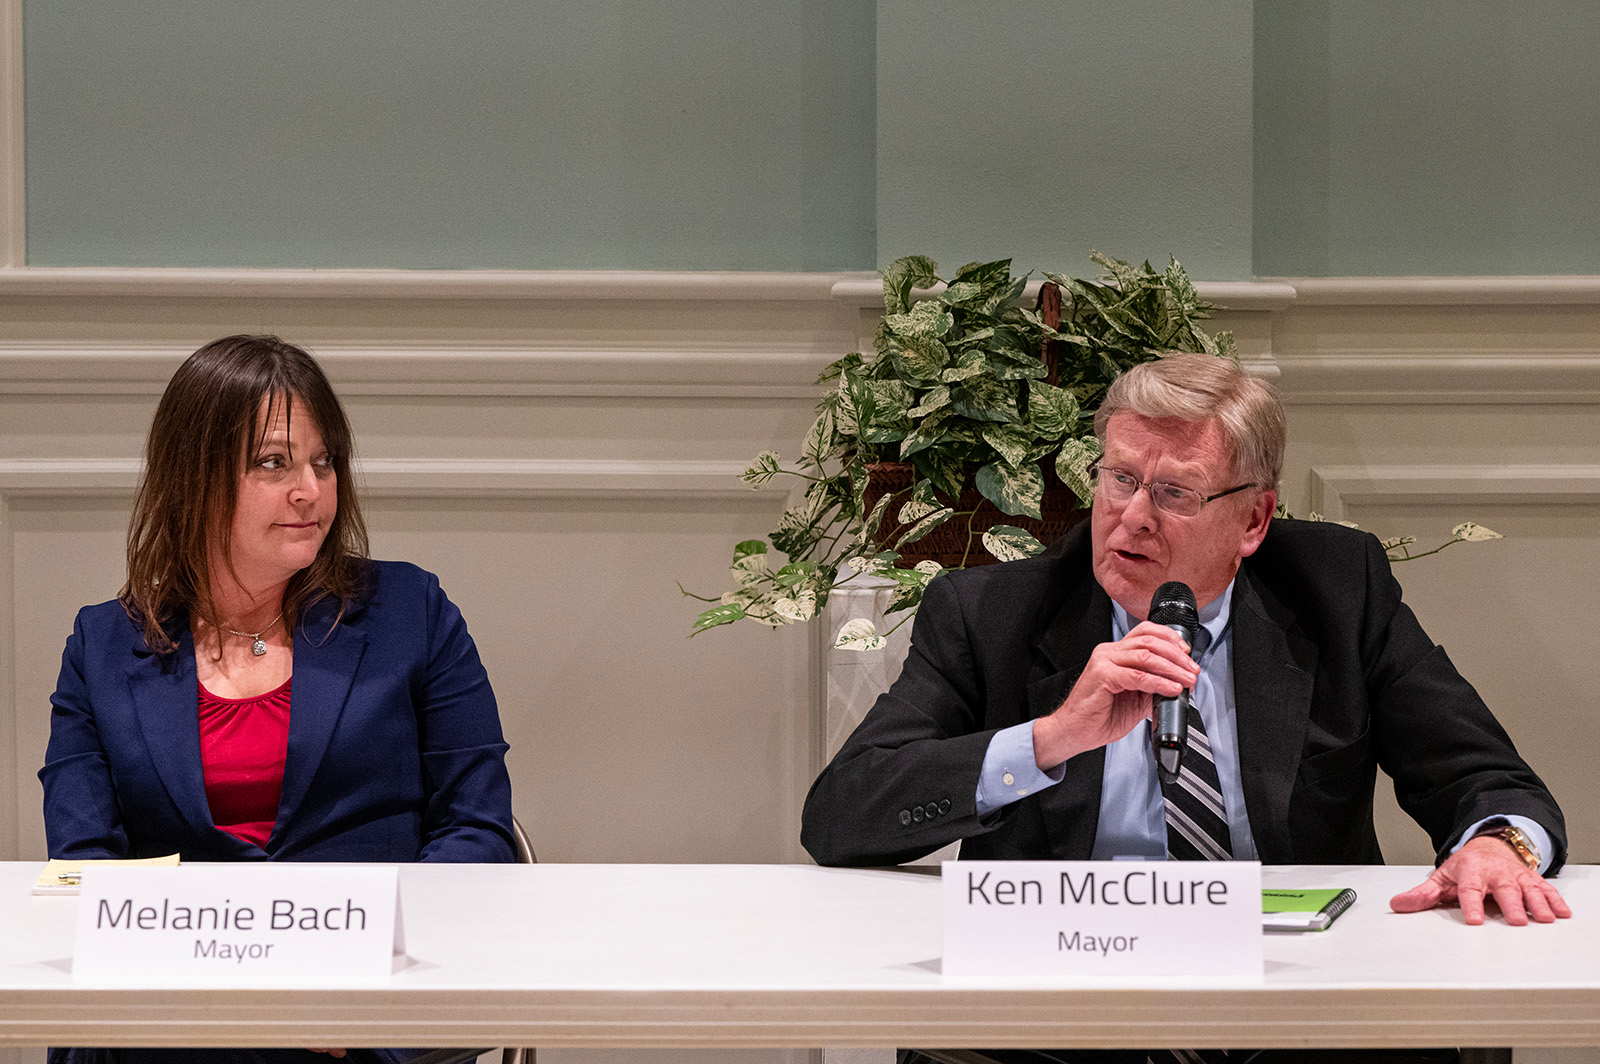 Mayoral candidates conflict over how to treat Springfield's growth and development